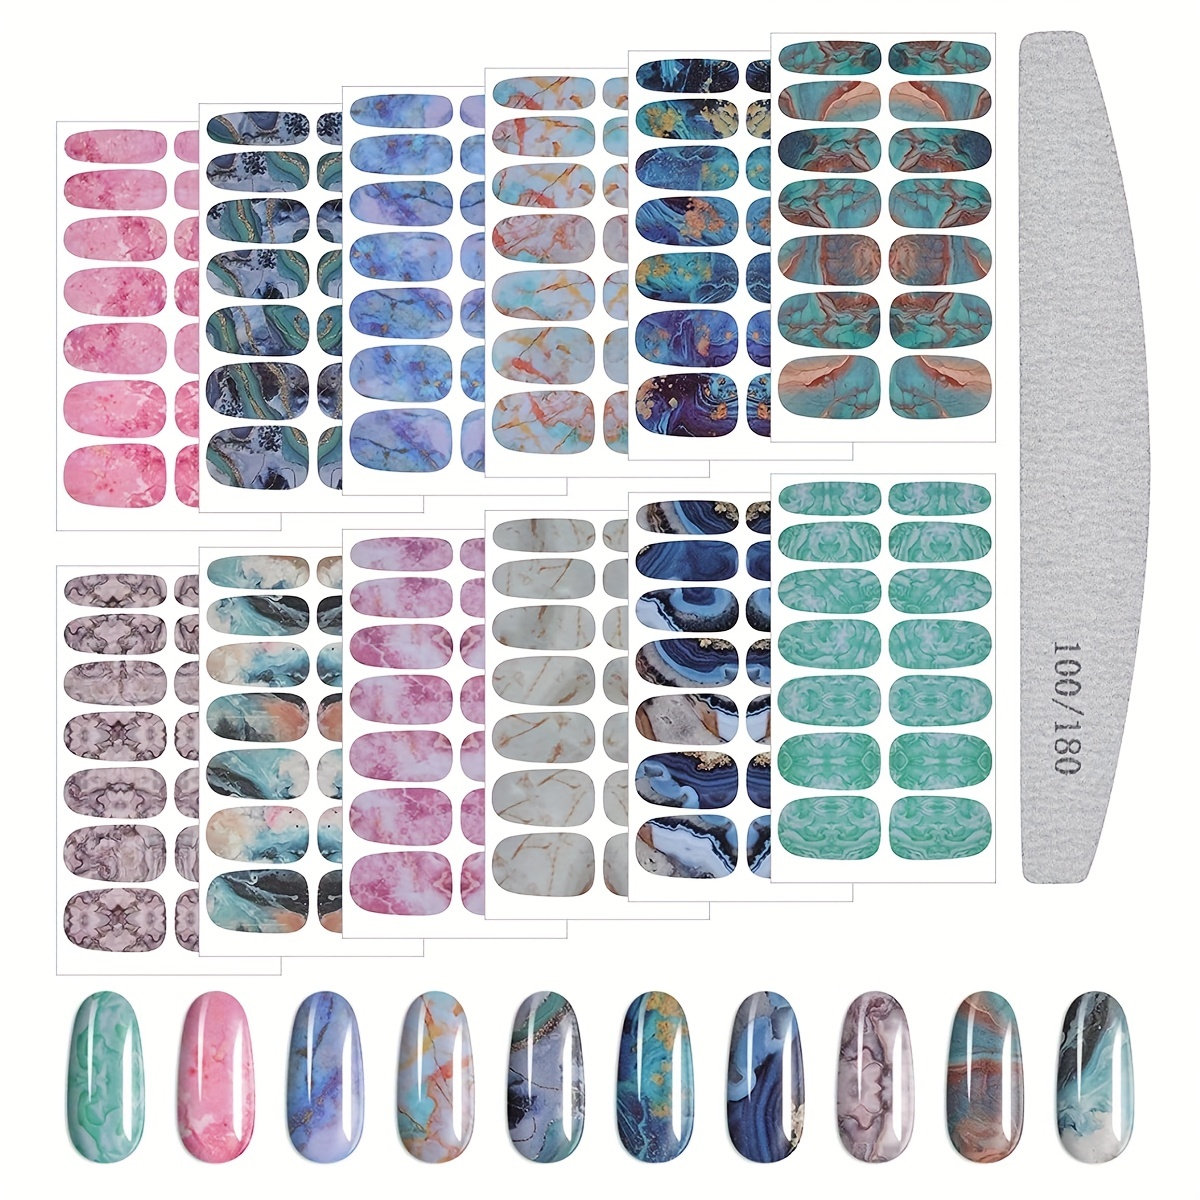 

12 Sheets Marble Nail Art Polish Stickers Full Wrap Strips, Self-adhesive Nail Polish Stickers Decal Marble Printed Full Wraps Strips Nail Art Polish Decals With Nail File